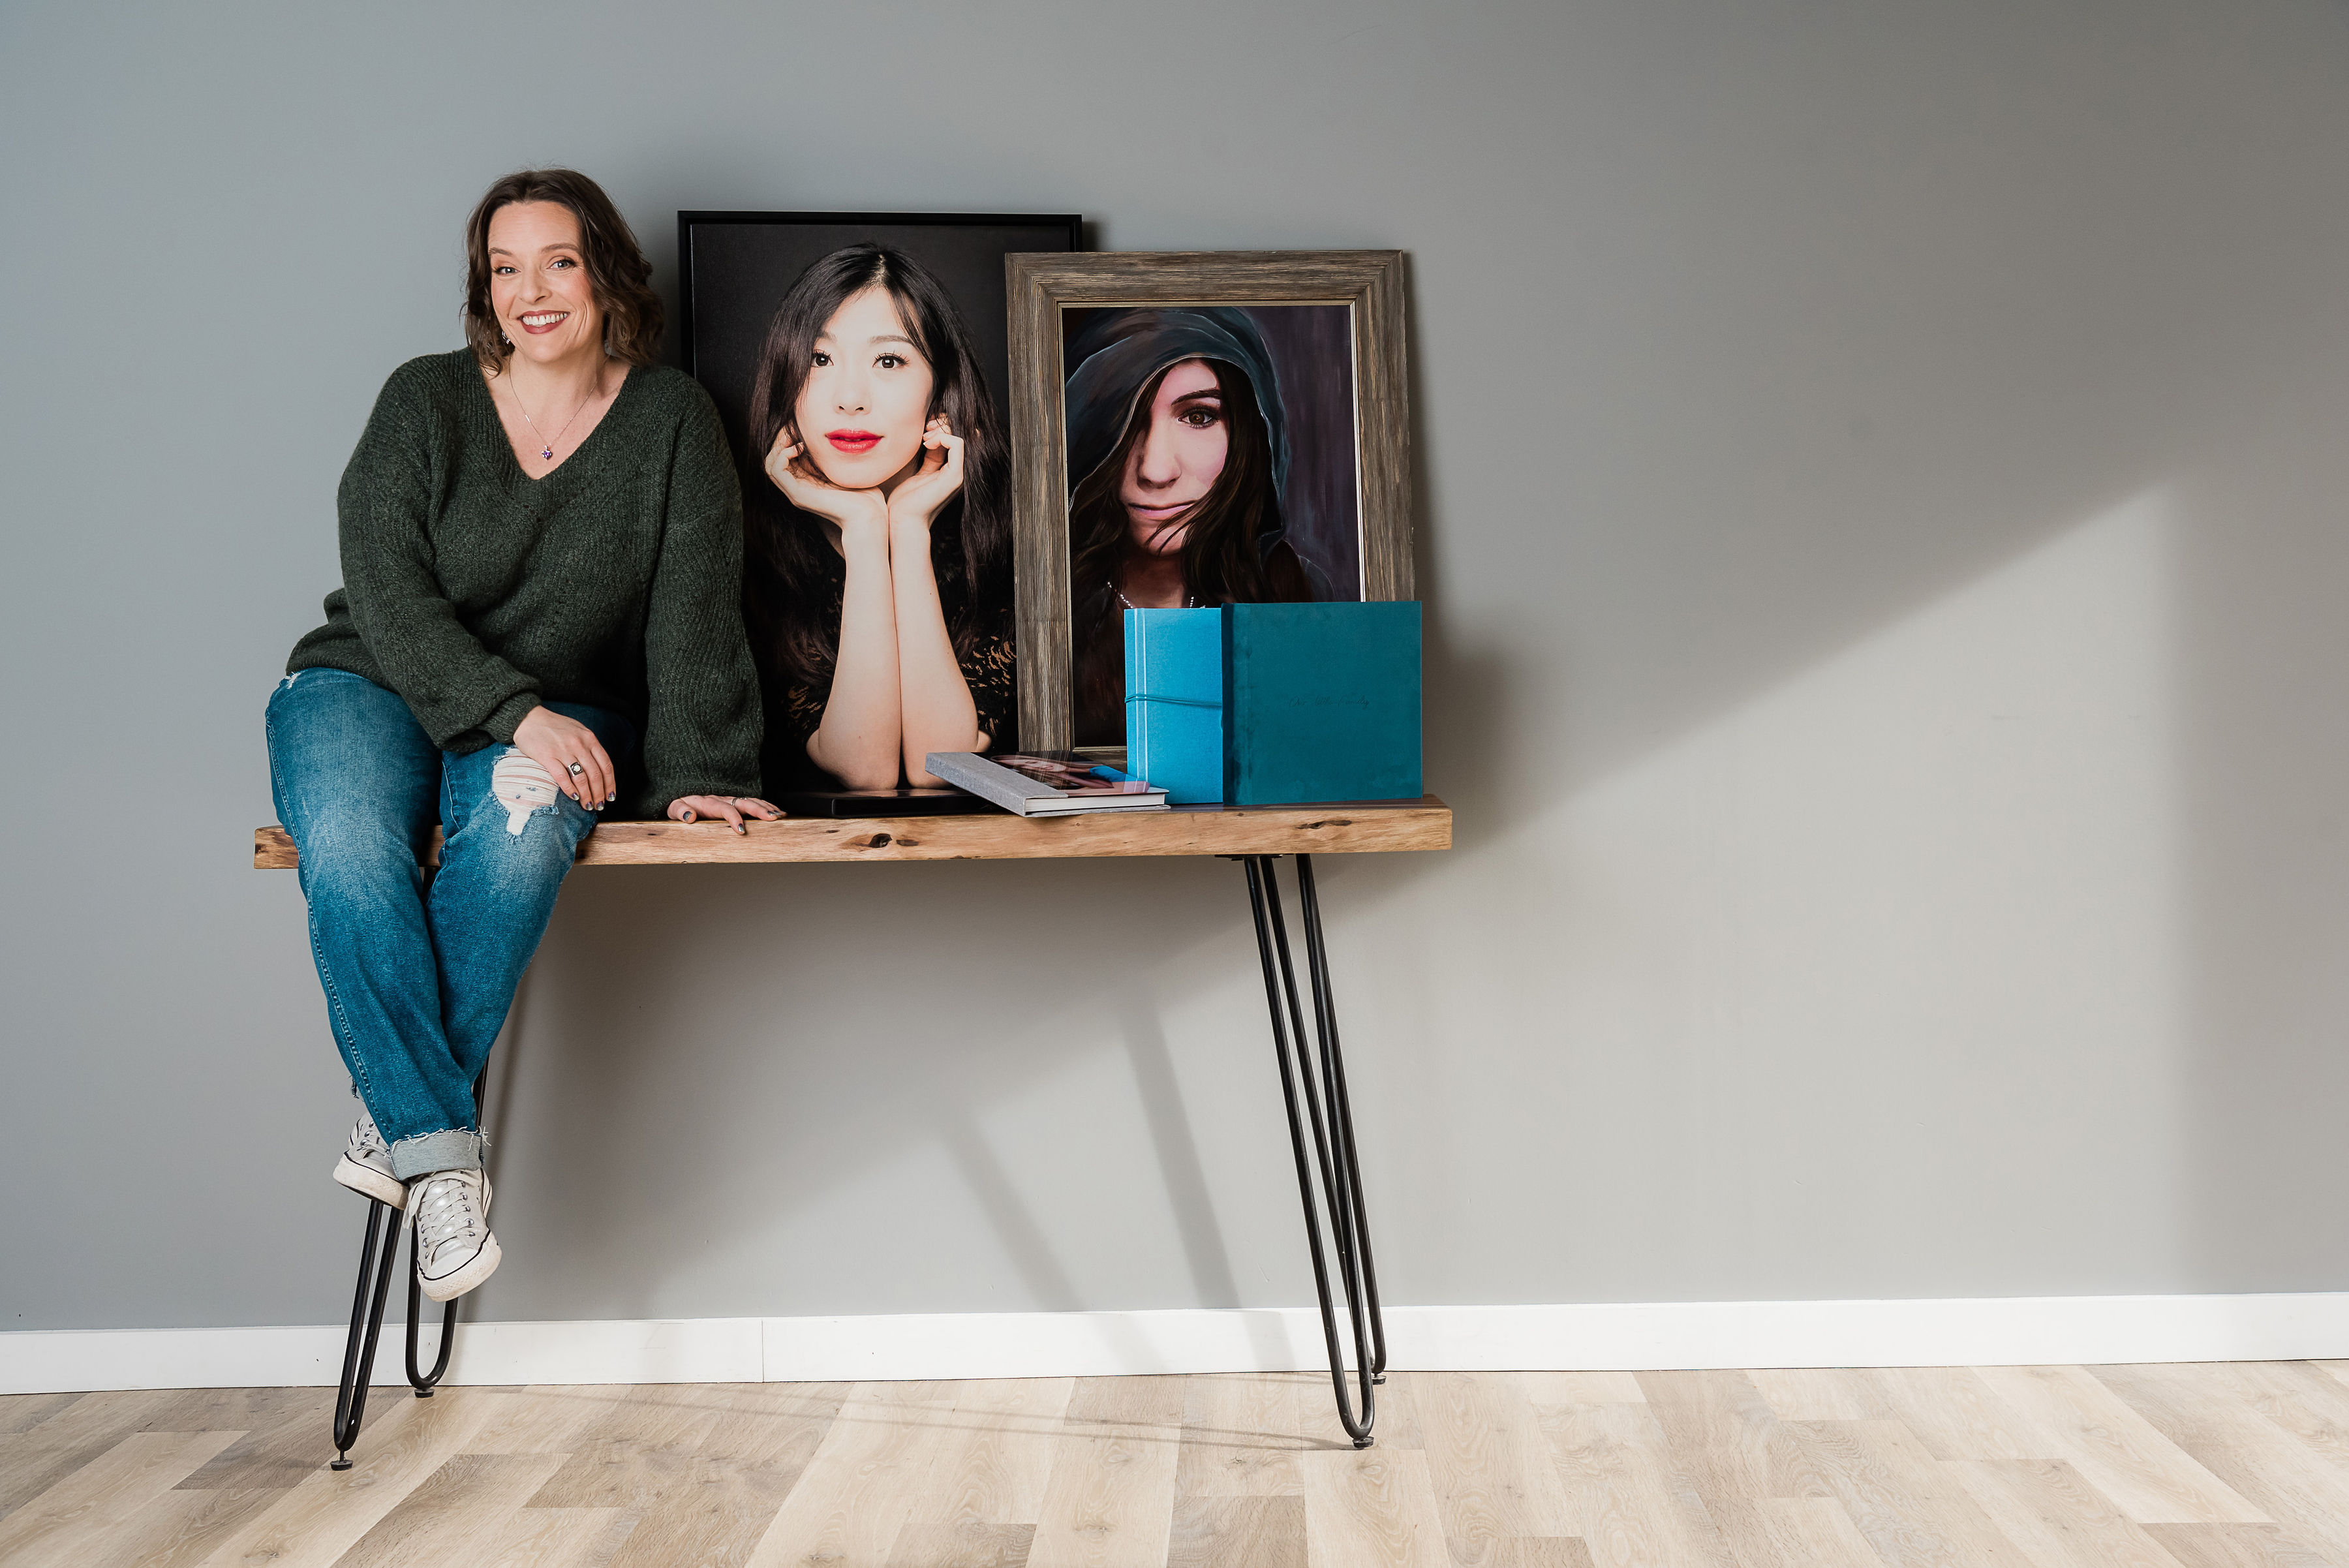 Photo of a woman sitting on a table next to framed portraits and photo albums.